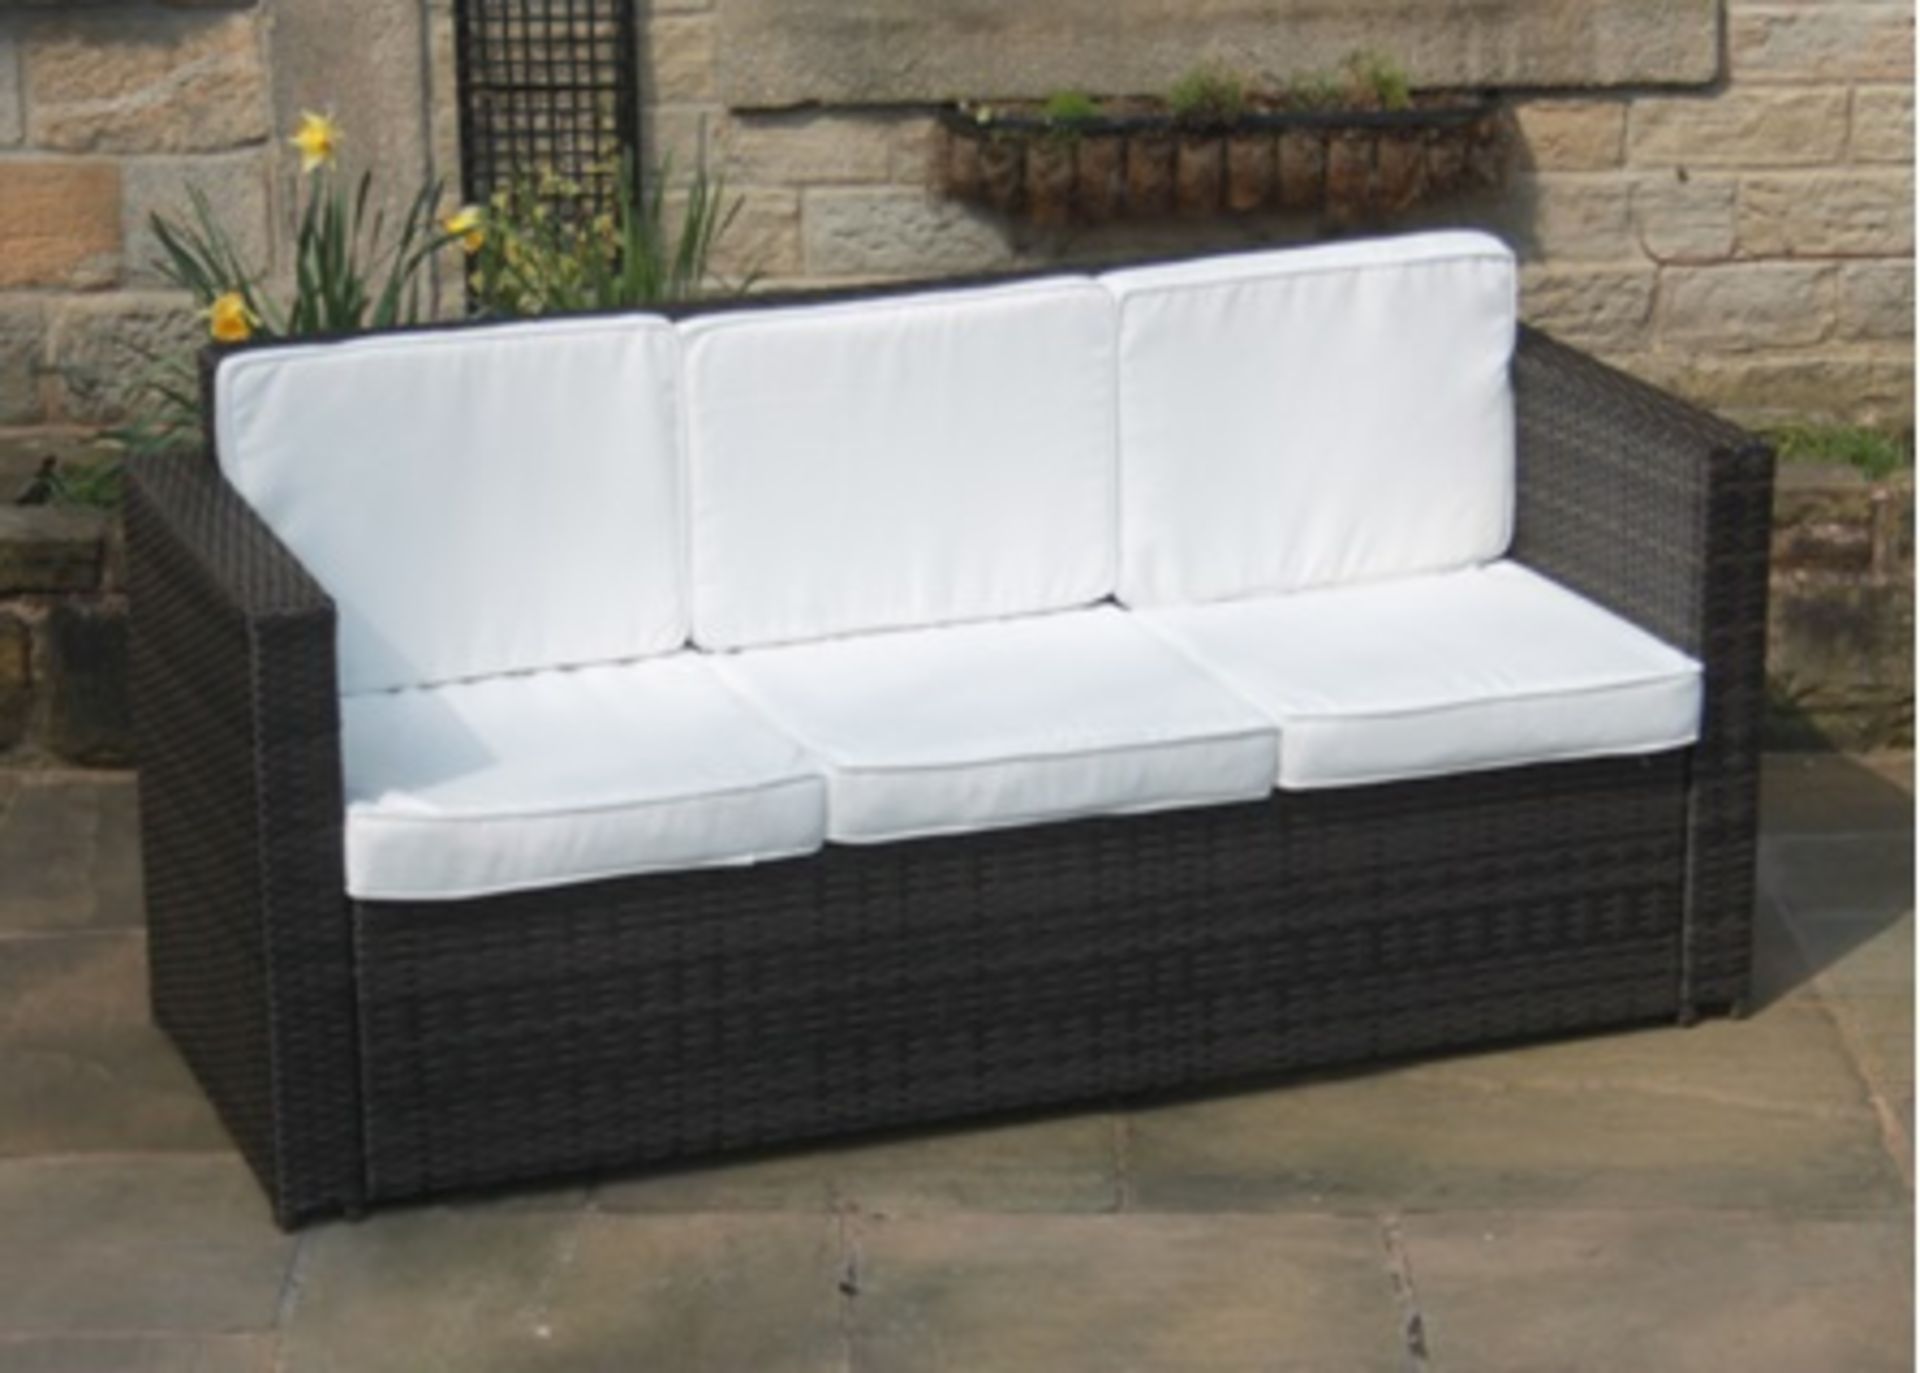 1 x Rattan Weather Proof Sofa 3 Seater Black - STLRBLK (Brand New & Boxed)